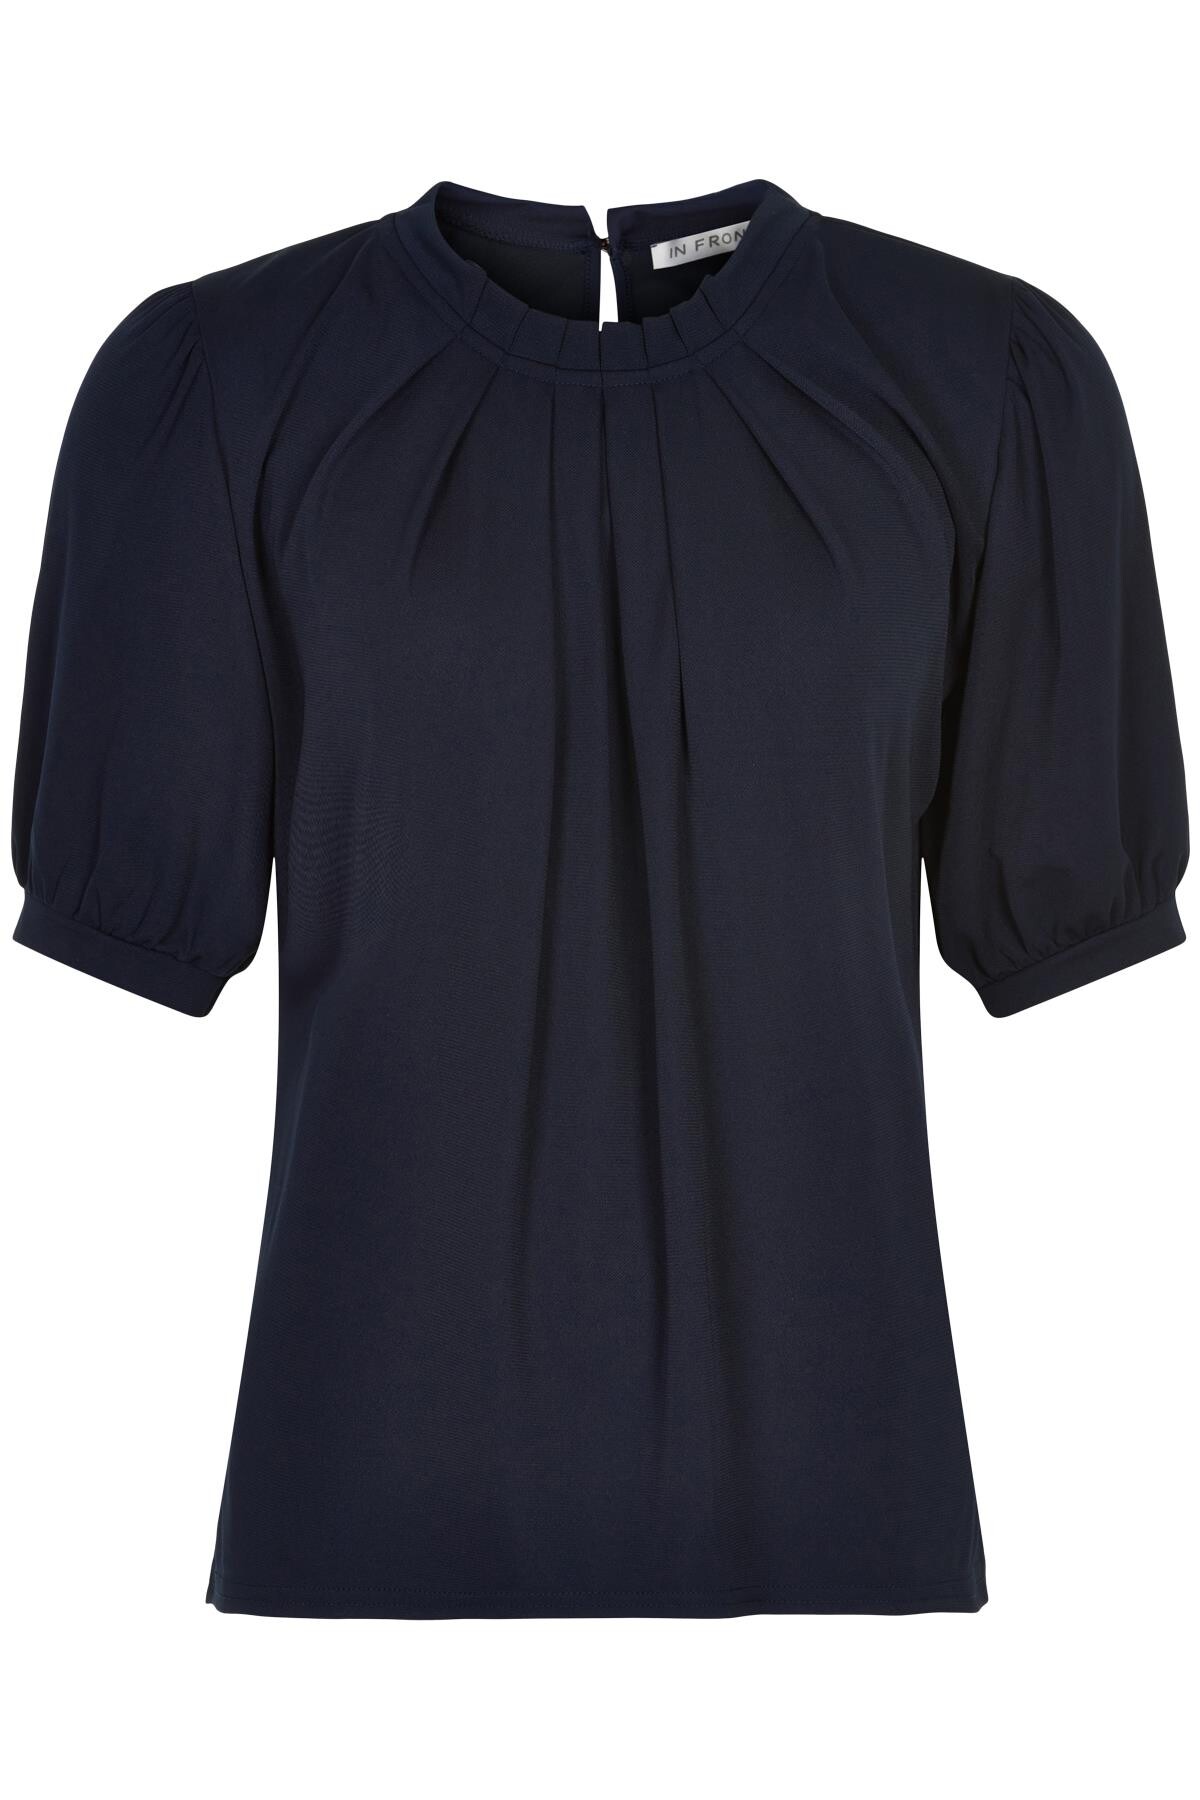 IN FRONT GRAZIA BLOUSE 14852 591 (Navy, M)